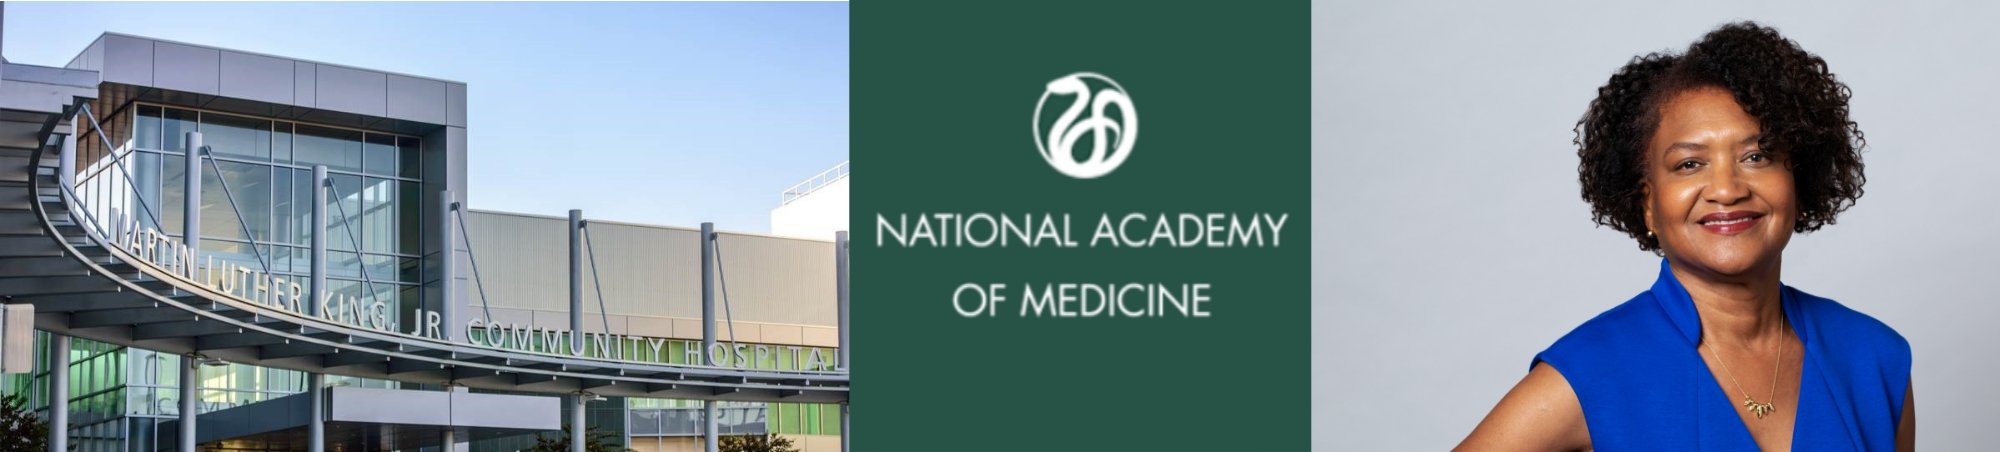 MLKCH CEO elected to National Academy of Medicine